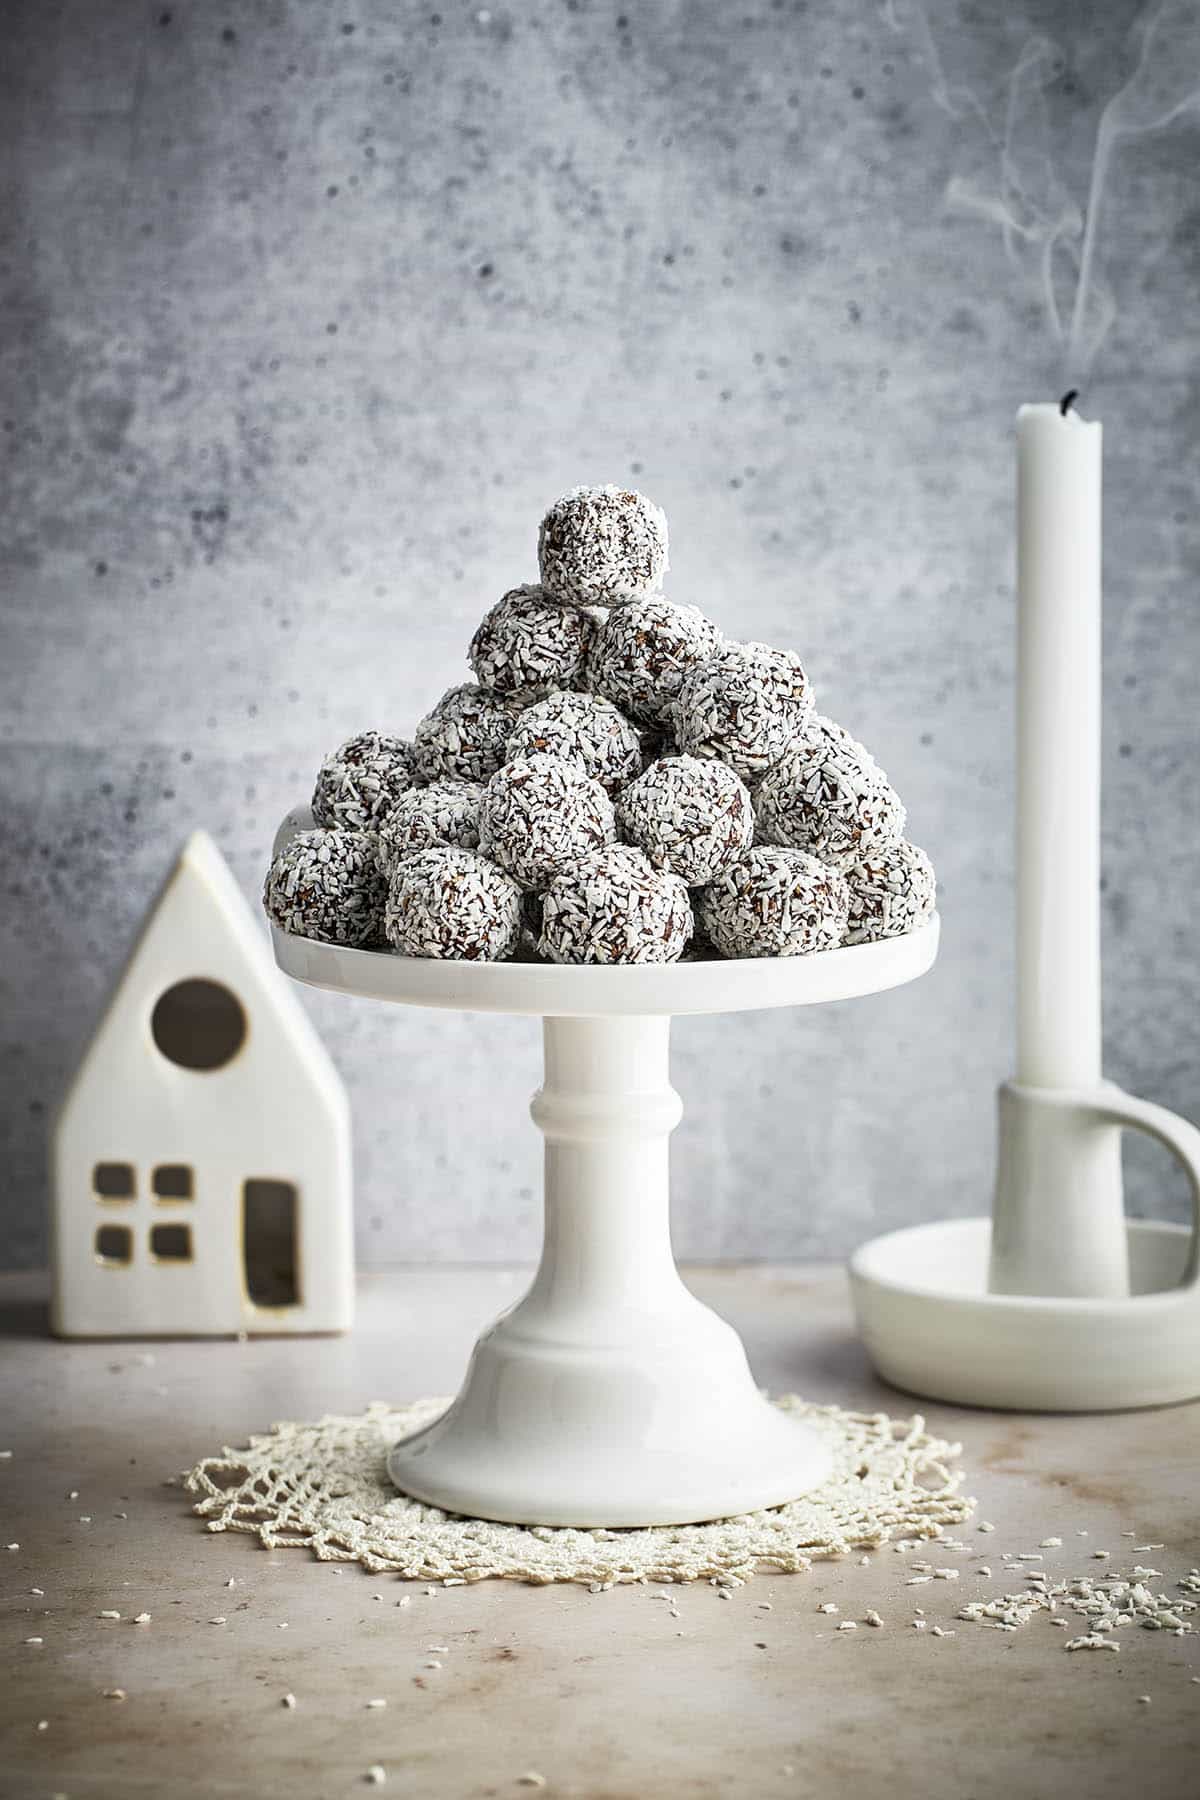 A cake stand piled with chocolate balls with a blown-out candle and ceramic house in background.